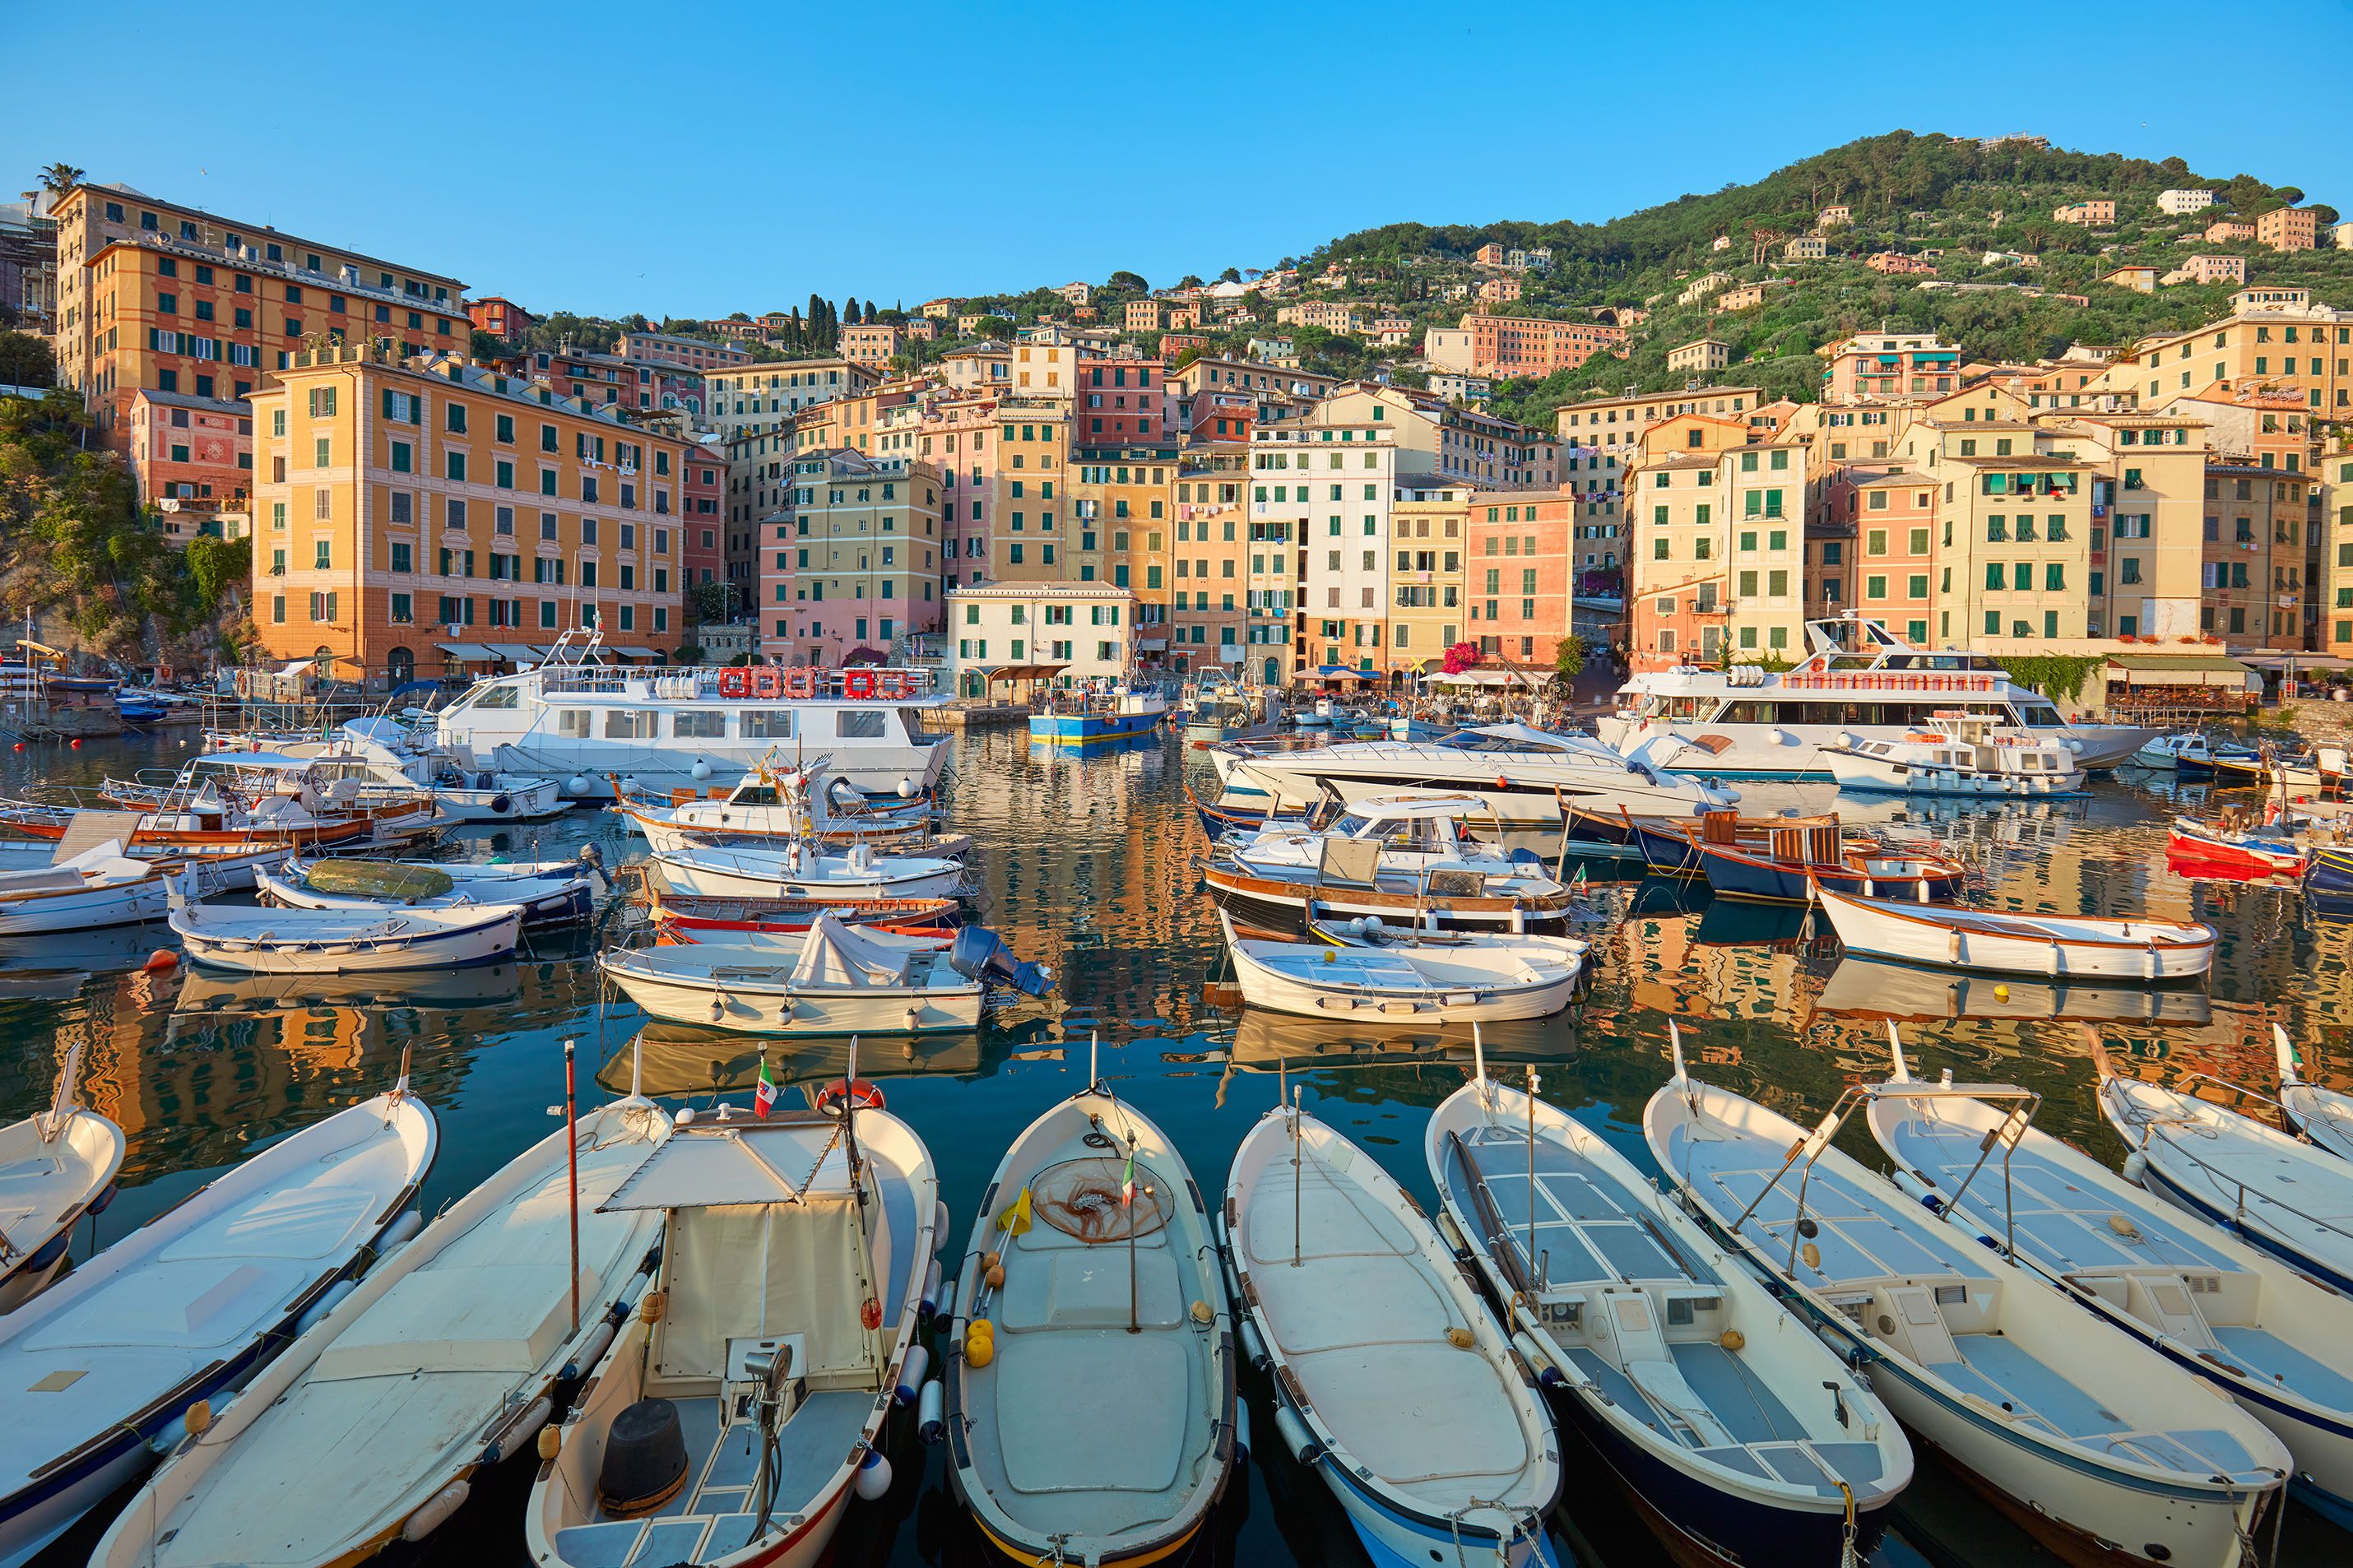 Camogli typical village with colorful houses and small harbor in Italy, Liguria in a sunny day